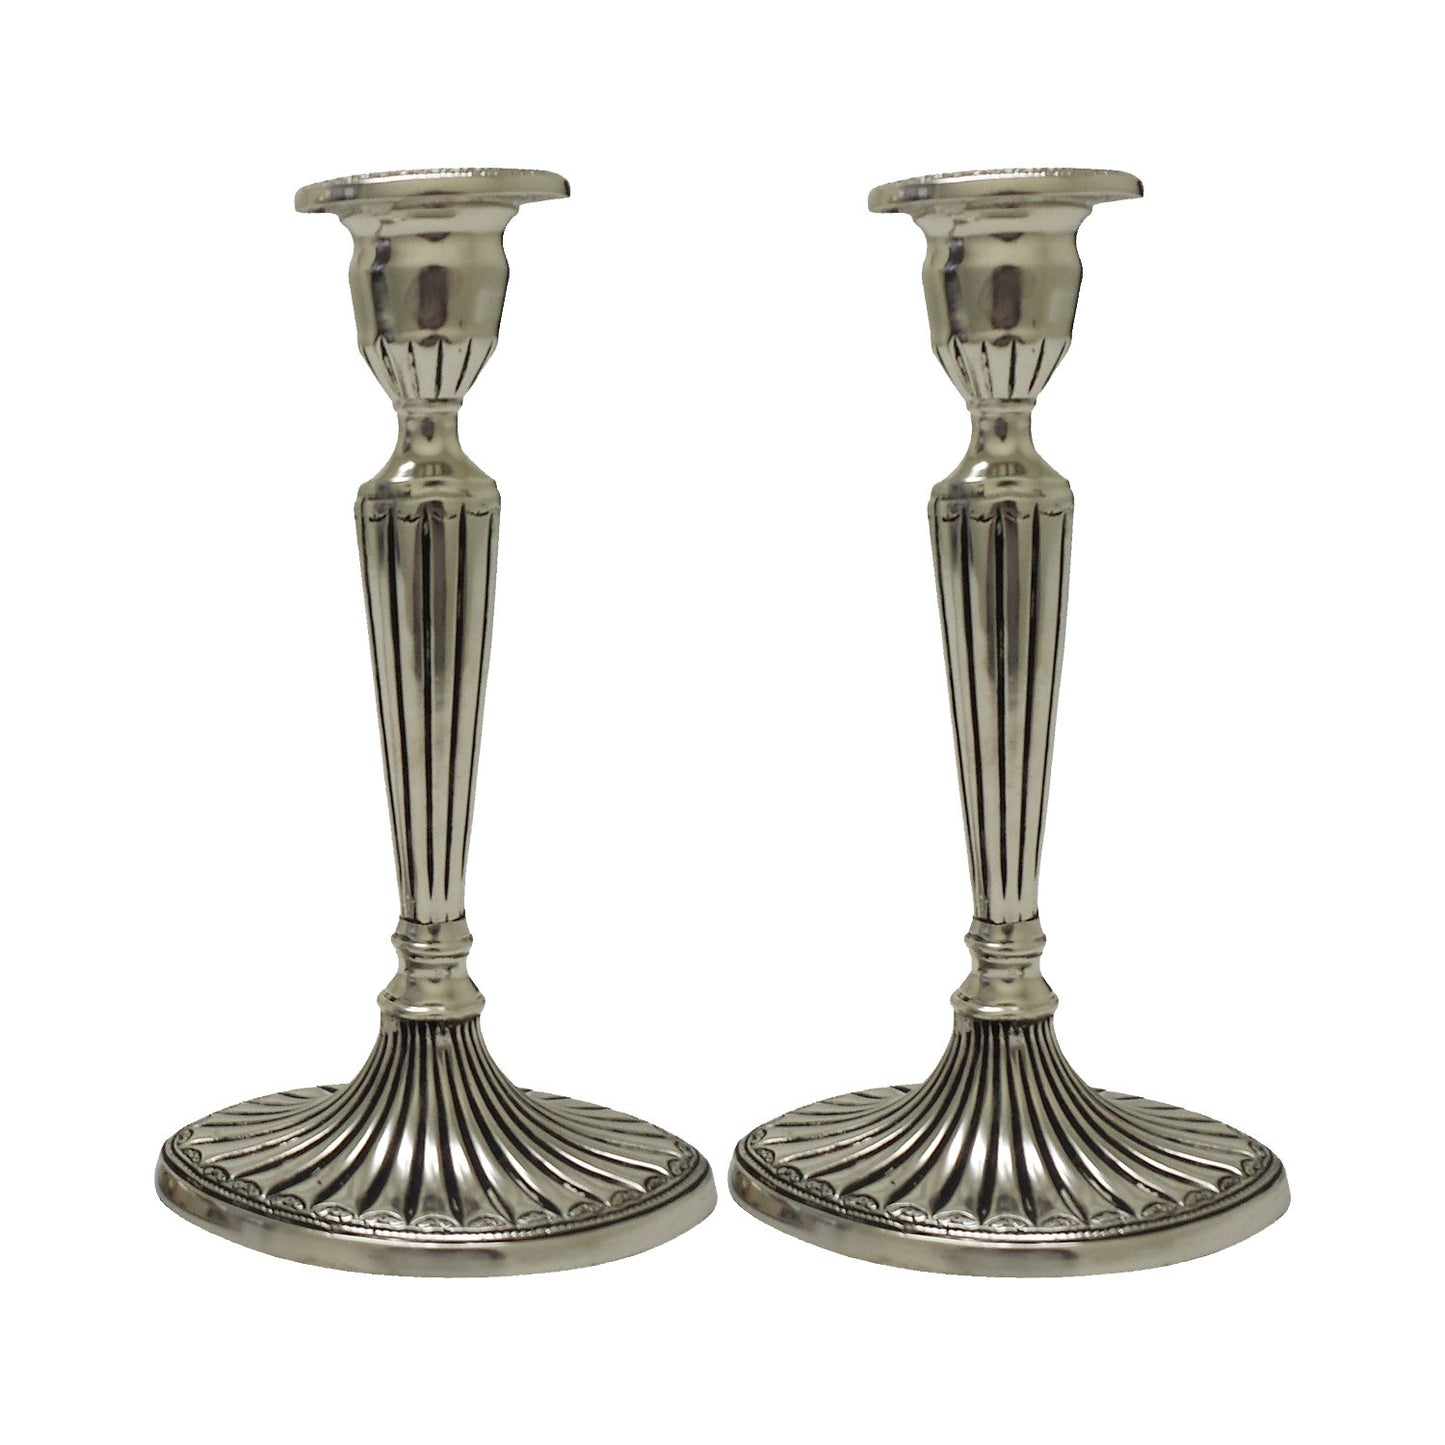 GiftBay 1002(S/2) Candlestick Holder, Antique Silver Finish, 9"h and 5" X 4" Oval Base